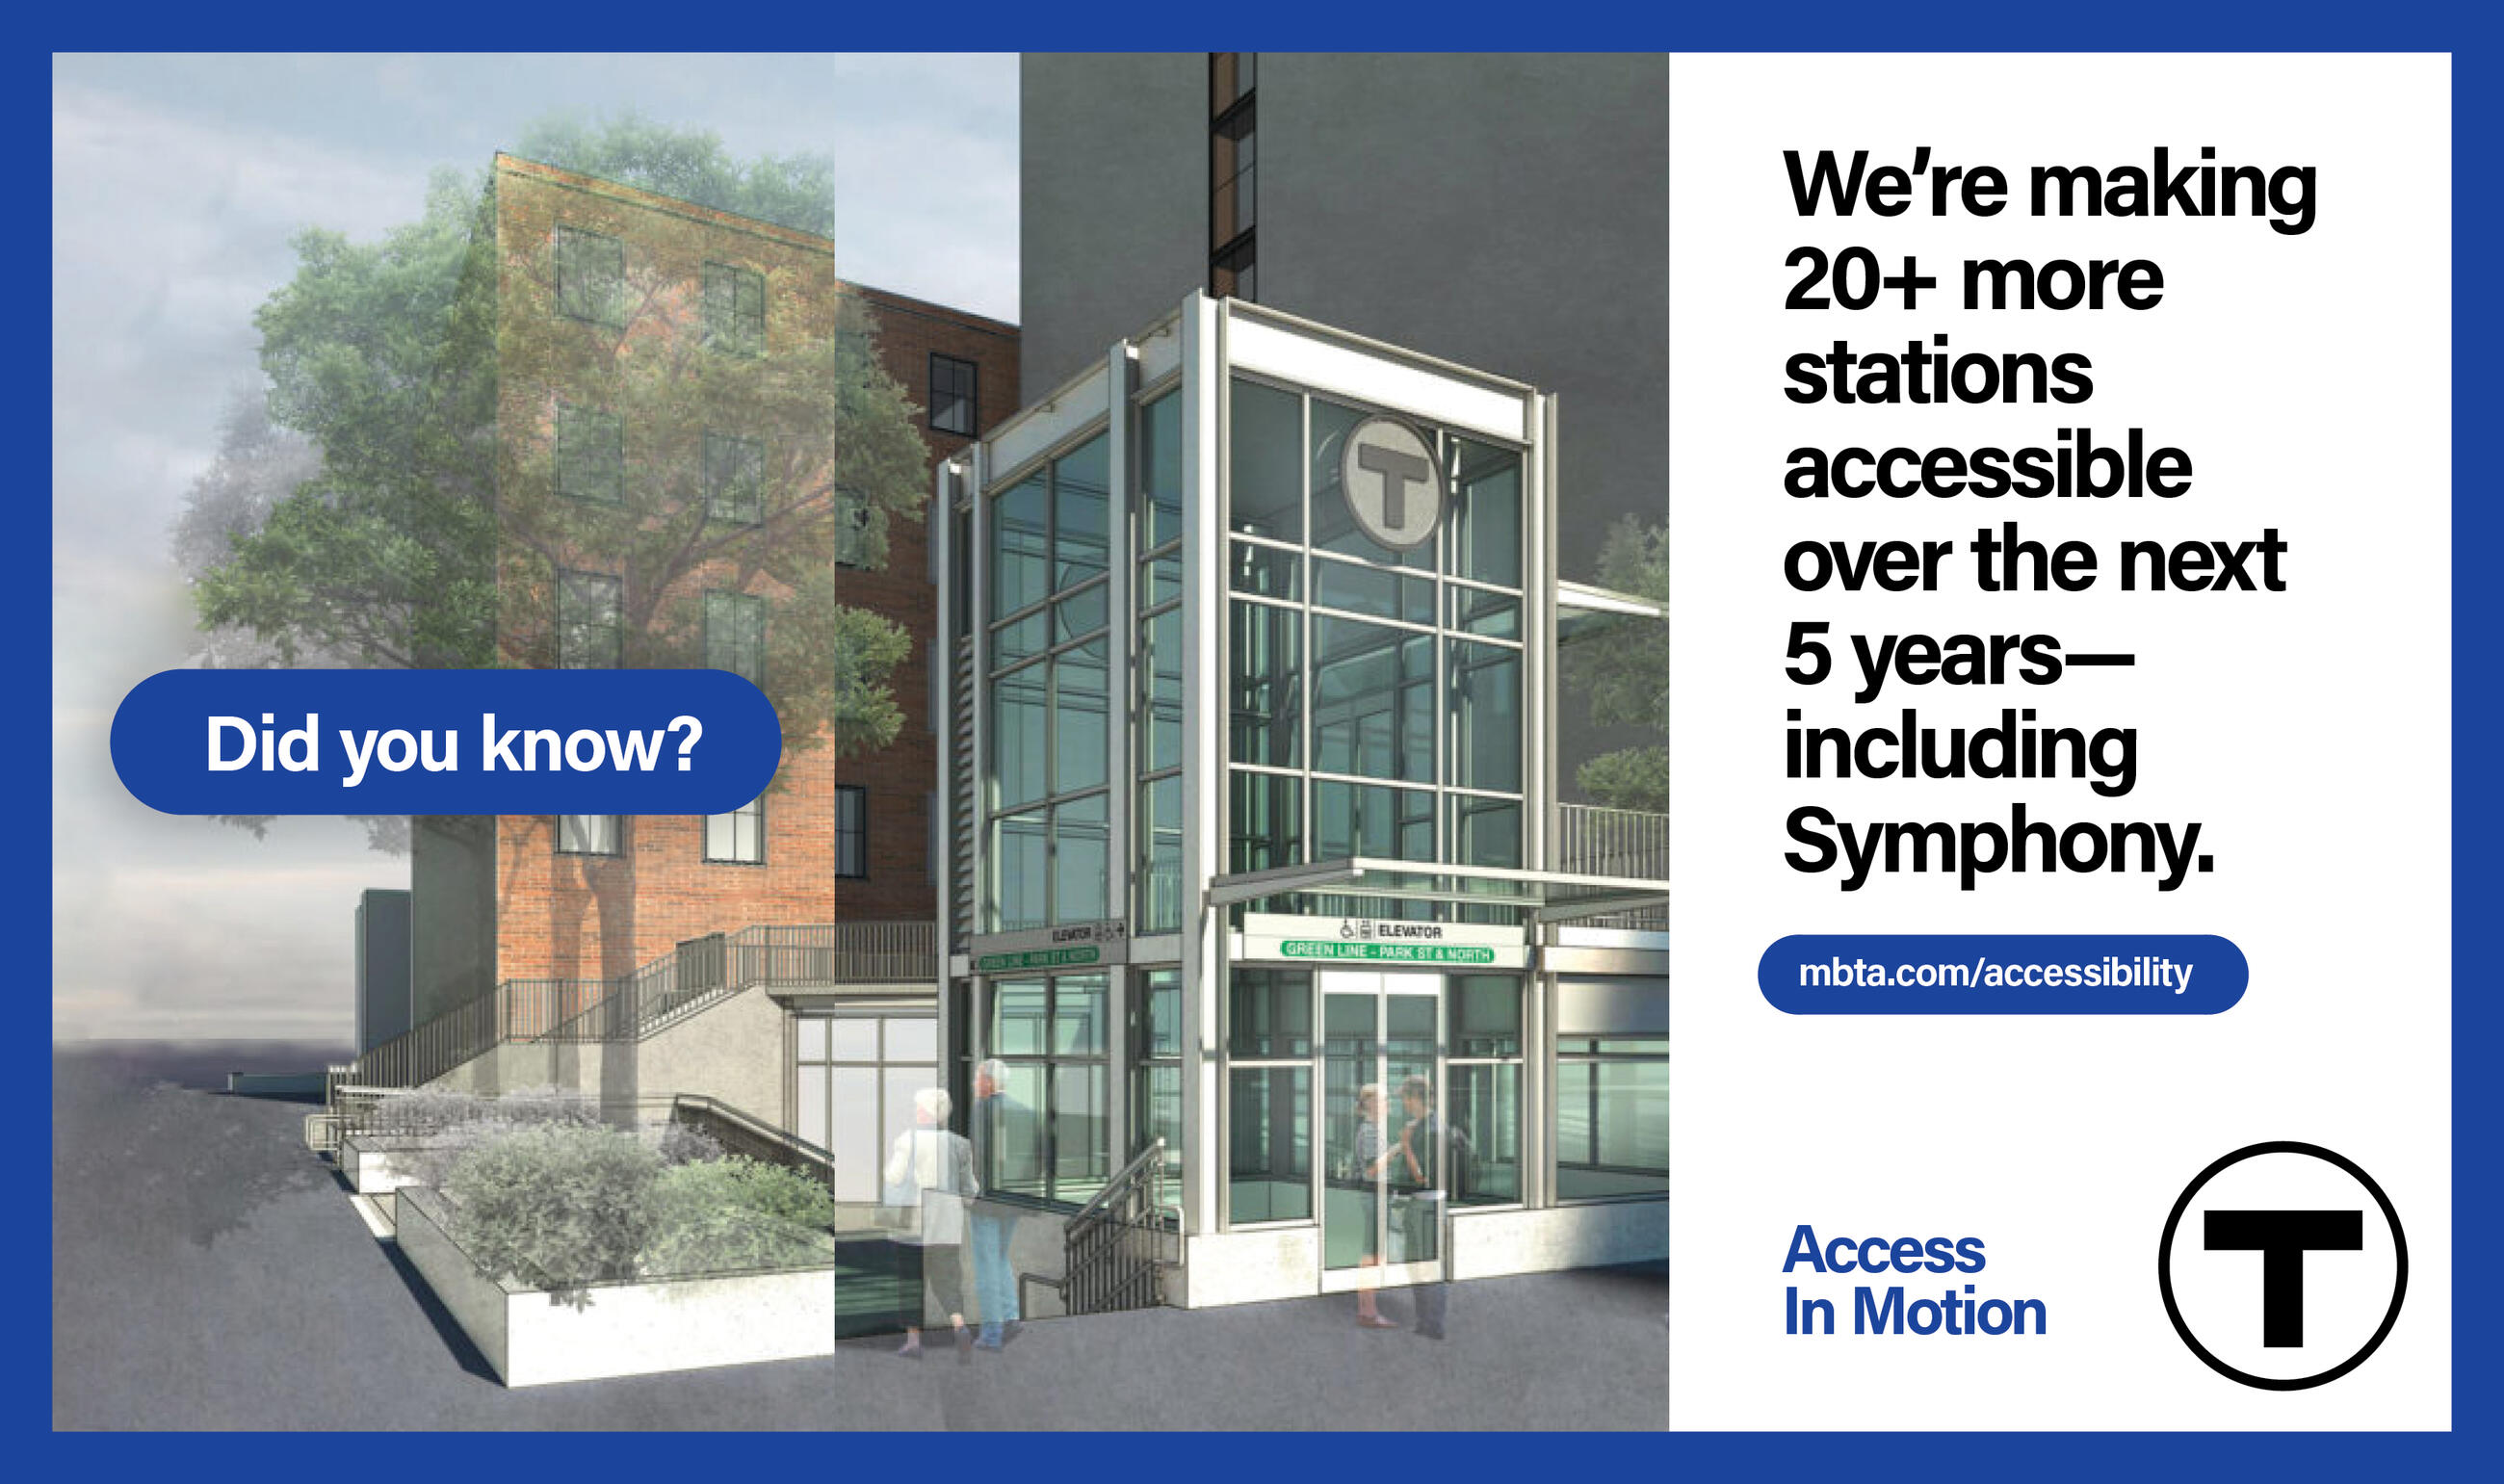 Spanning the left and center panels: A rendering of a future, glass-walled Symphony Station. The words “Did you know?” appear in a blue bubble in the foreground. Right panel (text): “We’re making 20+ more stations accessible over the next 5 years—including Symphony. mbta.com/accessibility” followed by the “Access In Motion” tagline and the T logo.